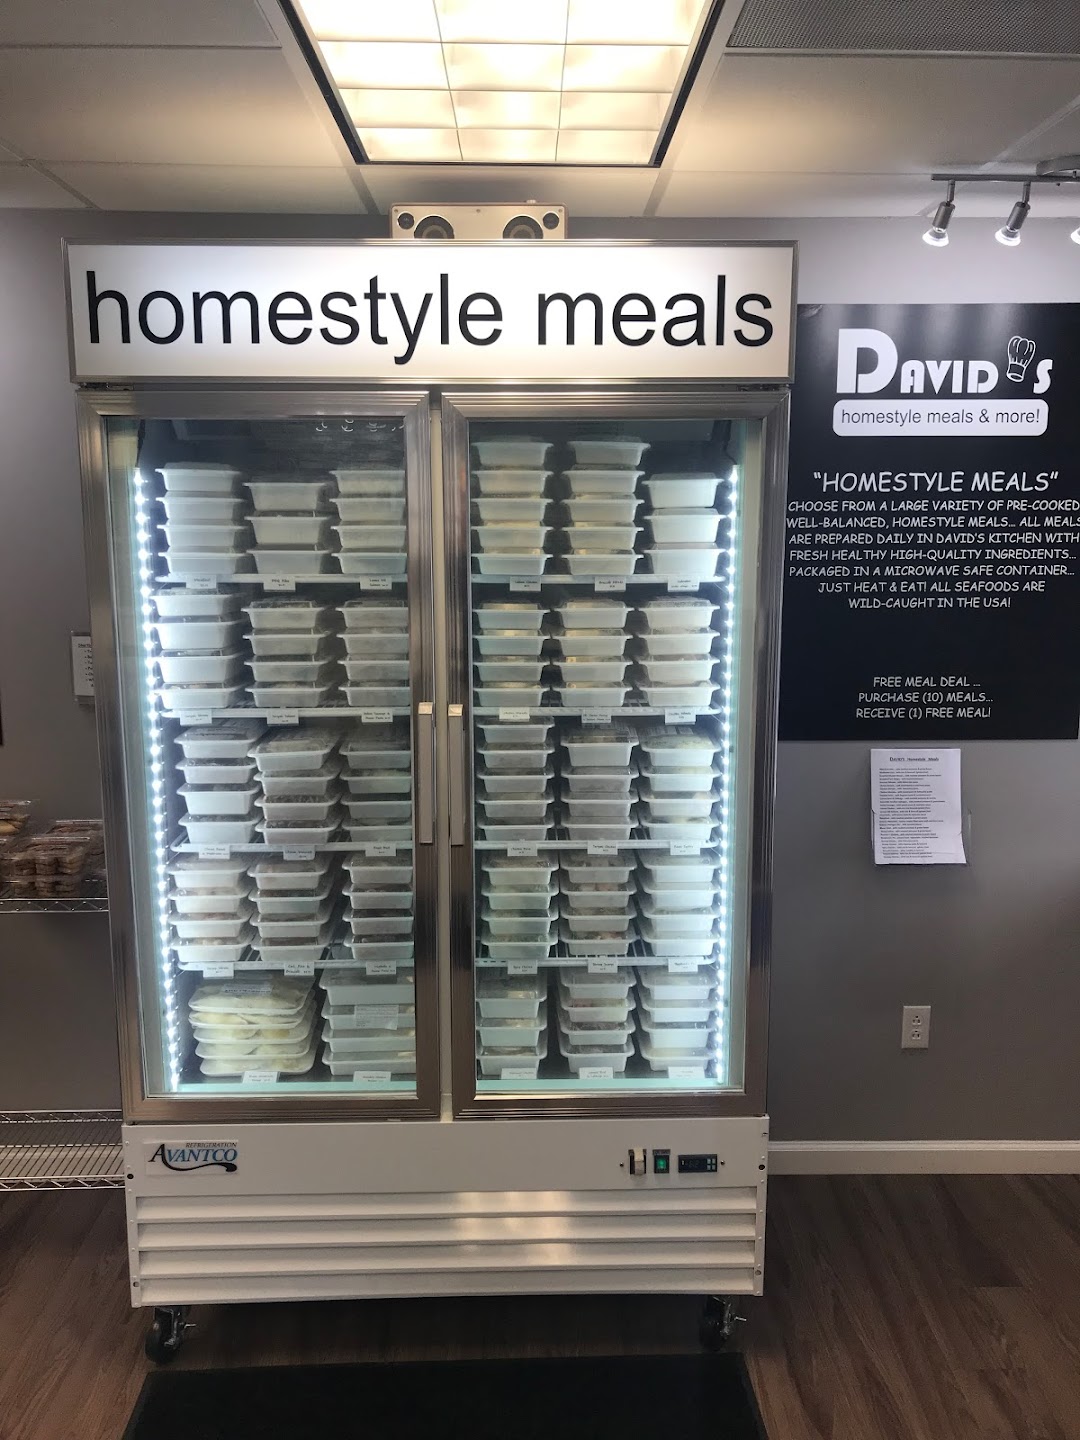 Davids Homestyle Meals & More